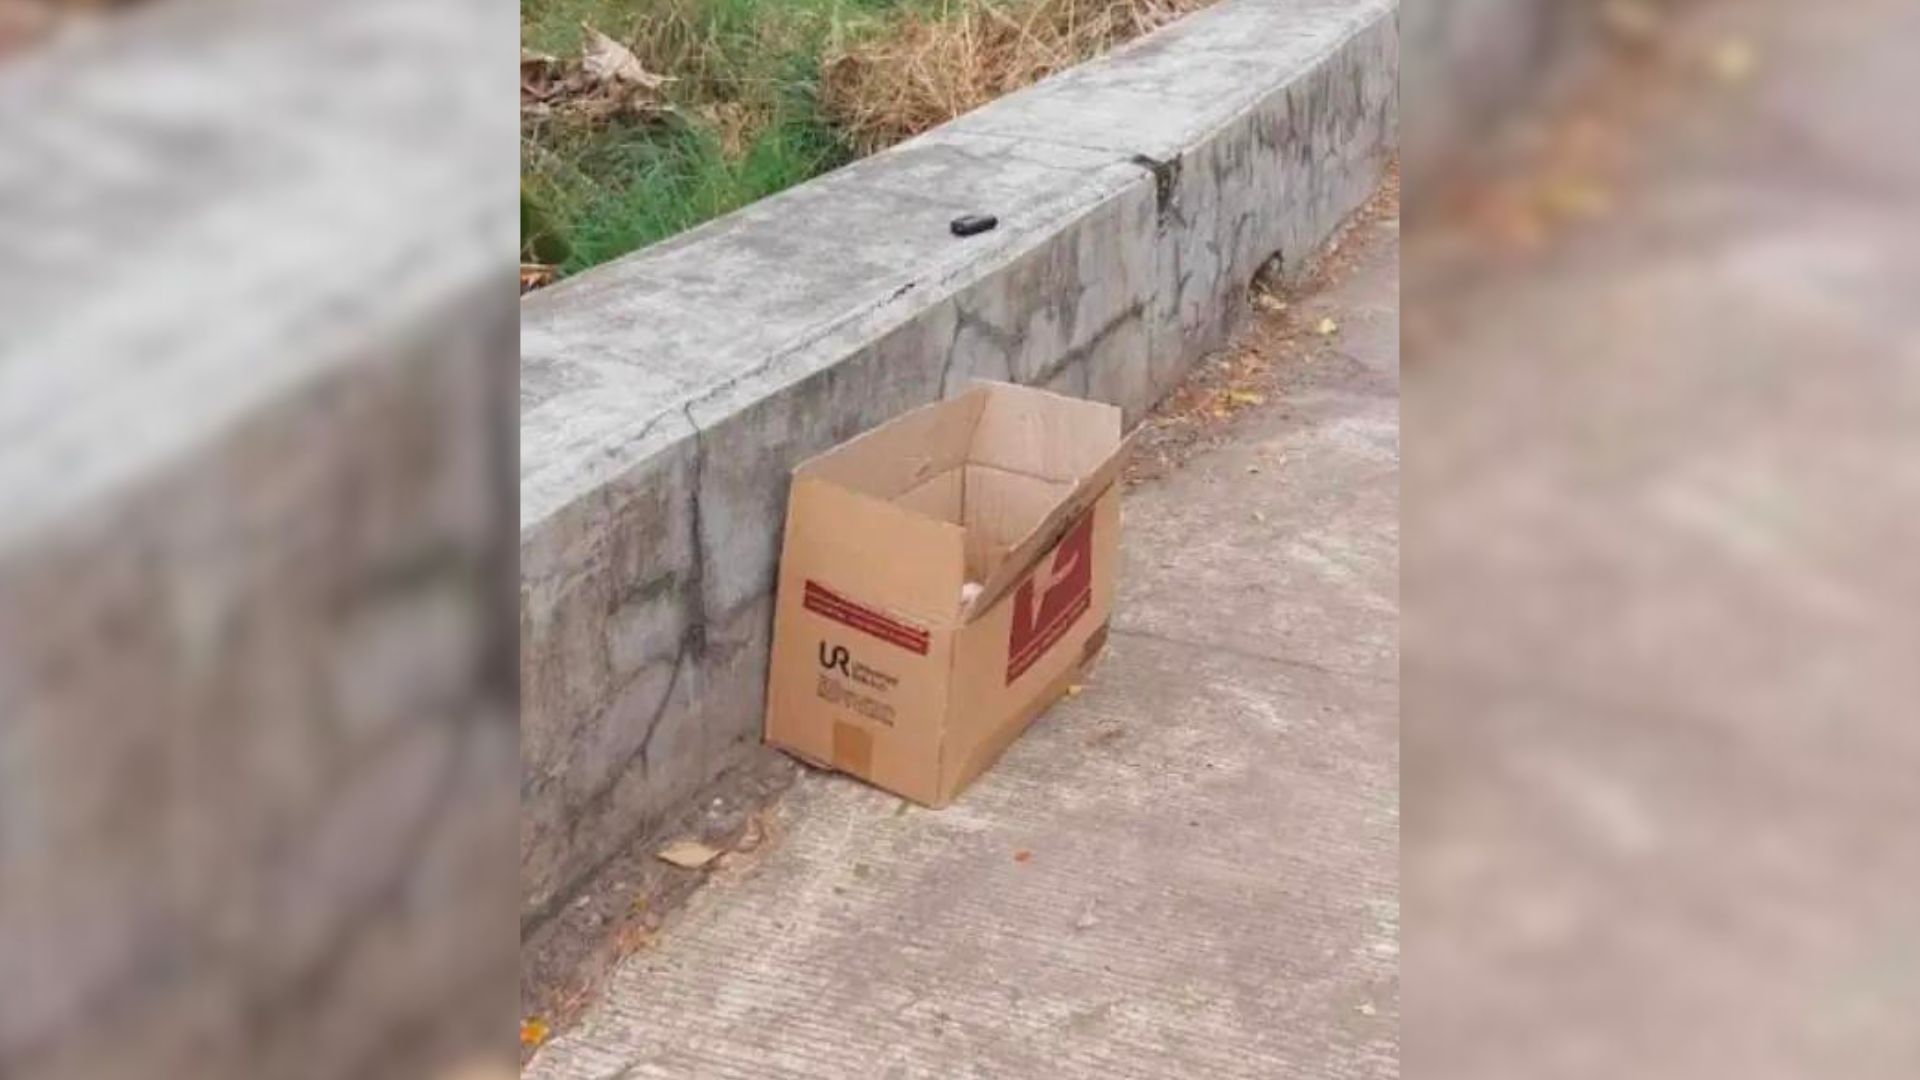 A Group Of Cyclists Shocked To Discover A Box With An Unexpected Surprise In It